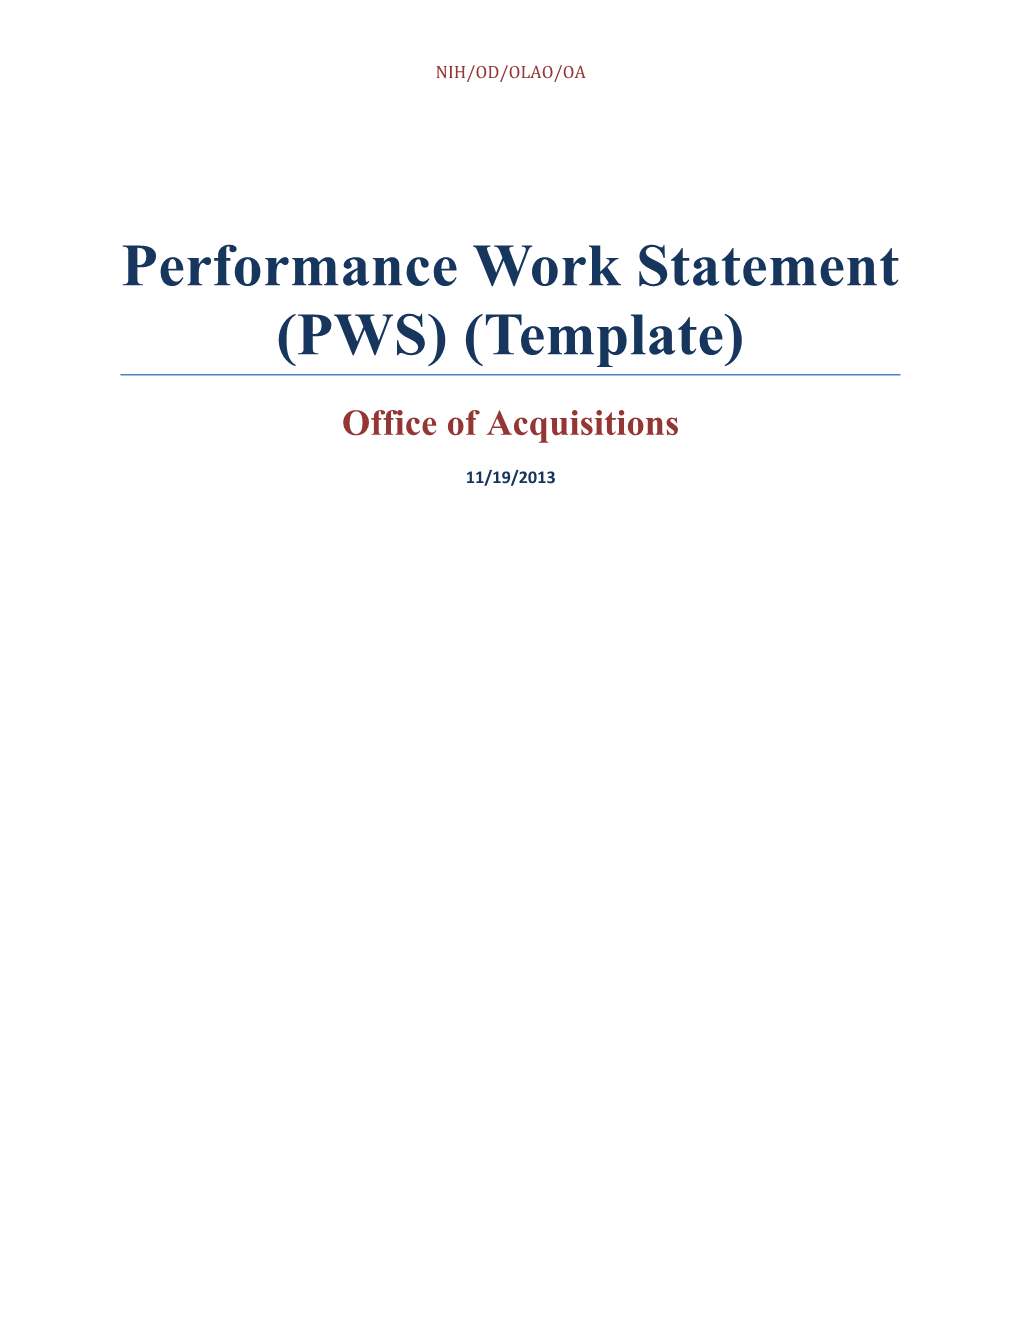 Statement of Work (Template)